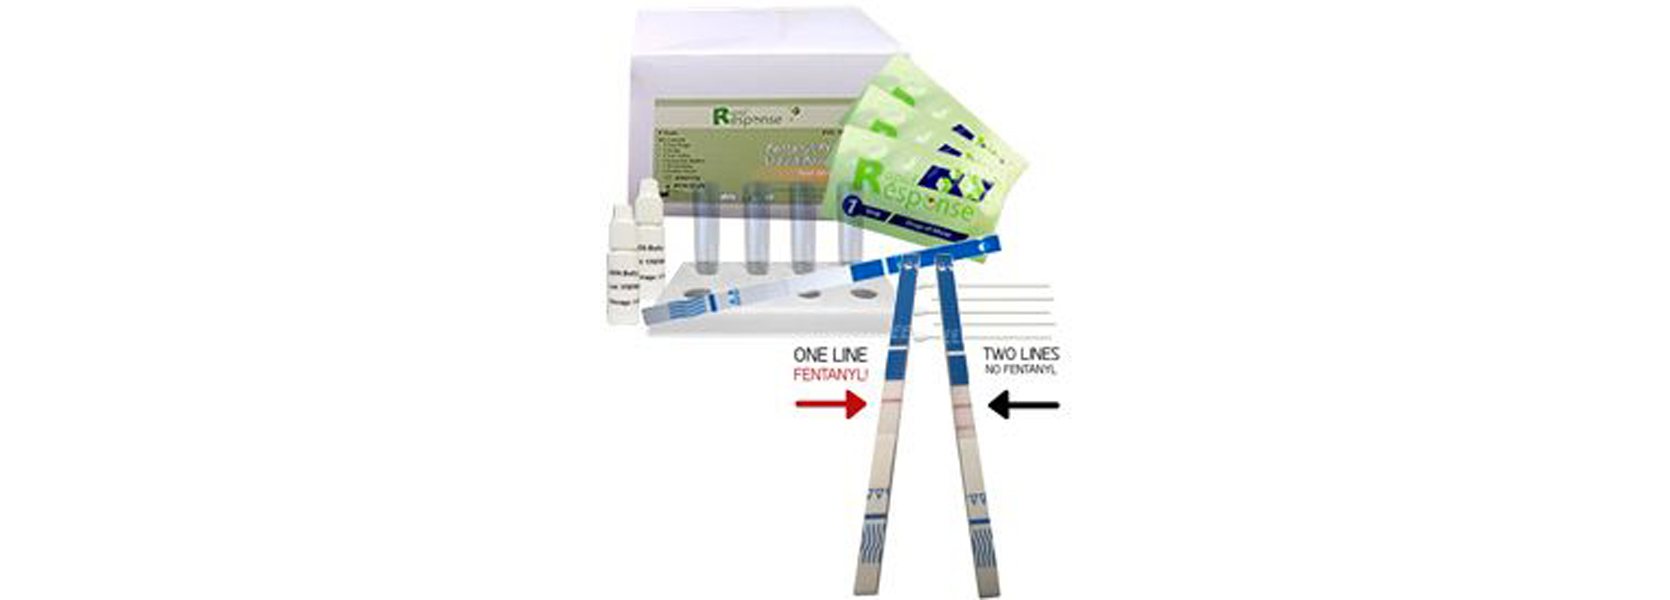 You are currently viewing Fentanyl Rapid Response Test Kit